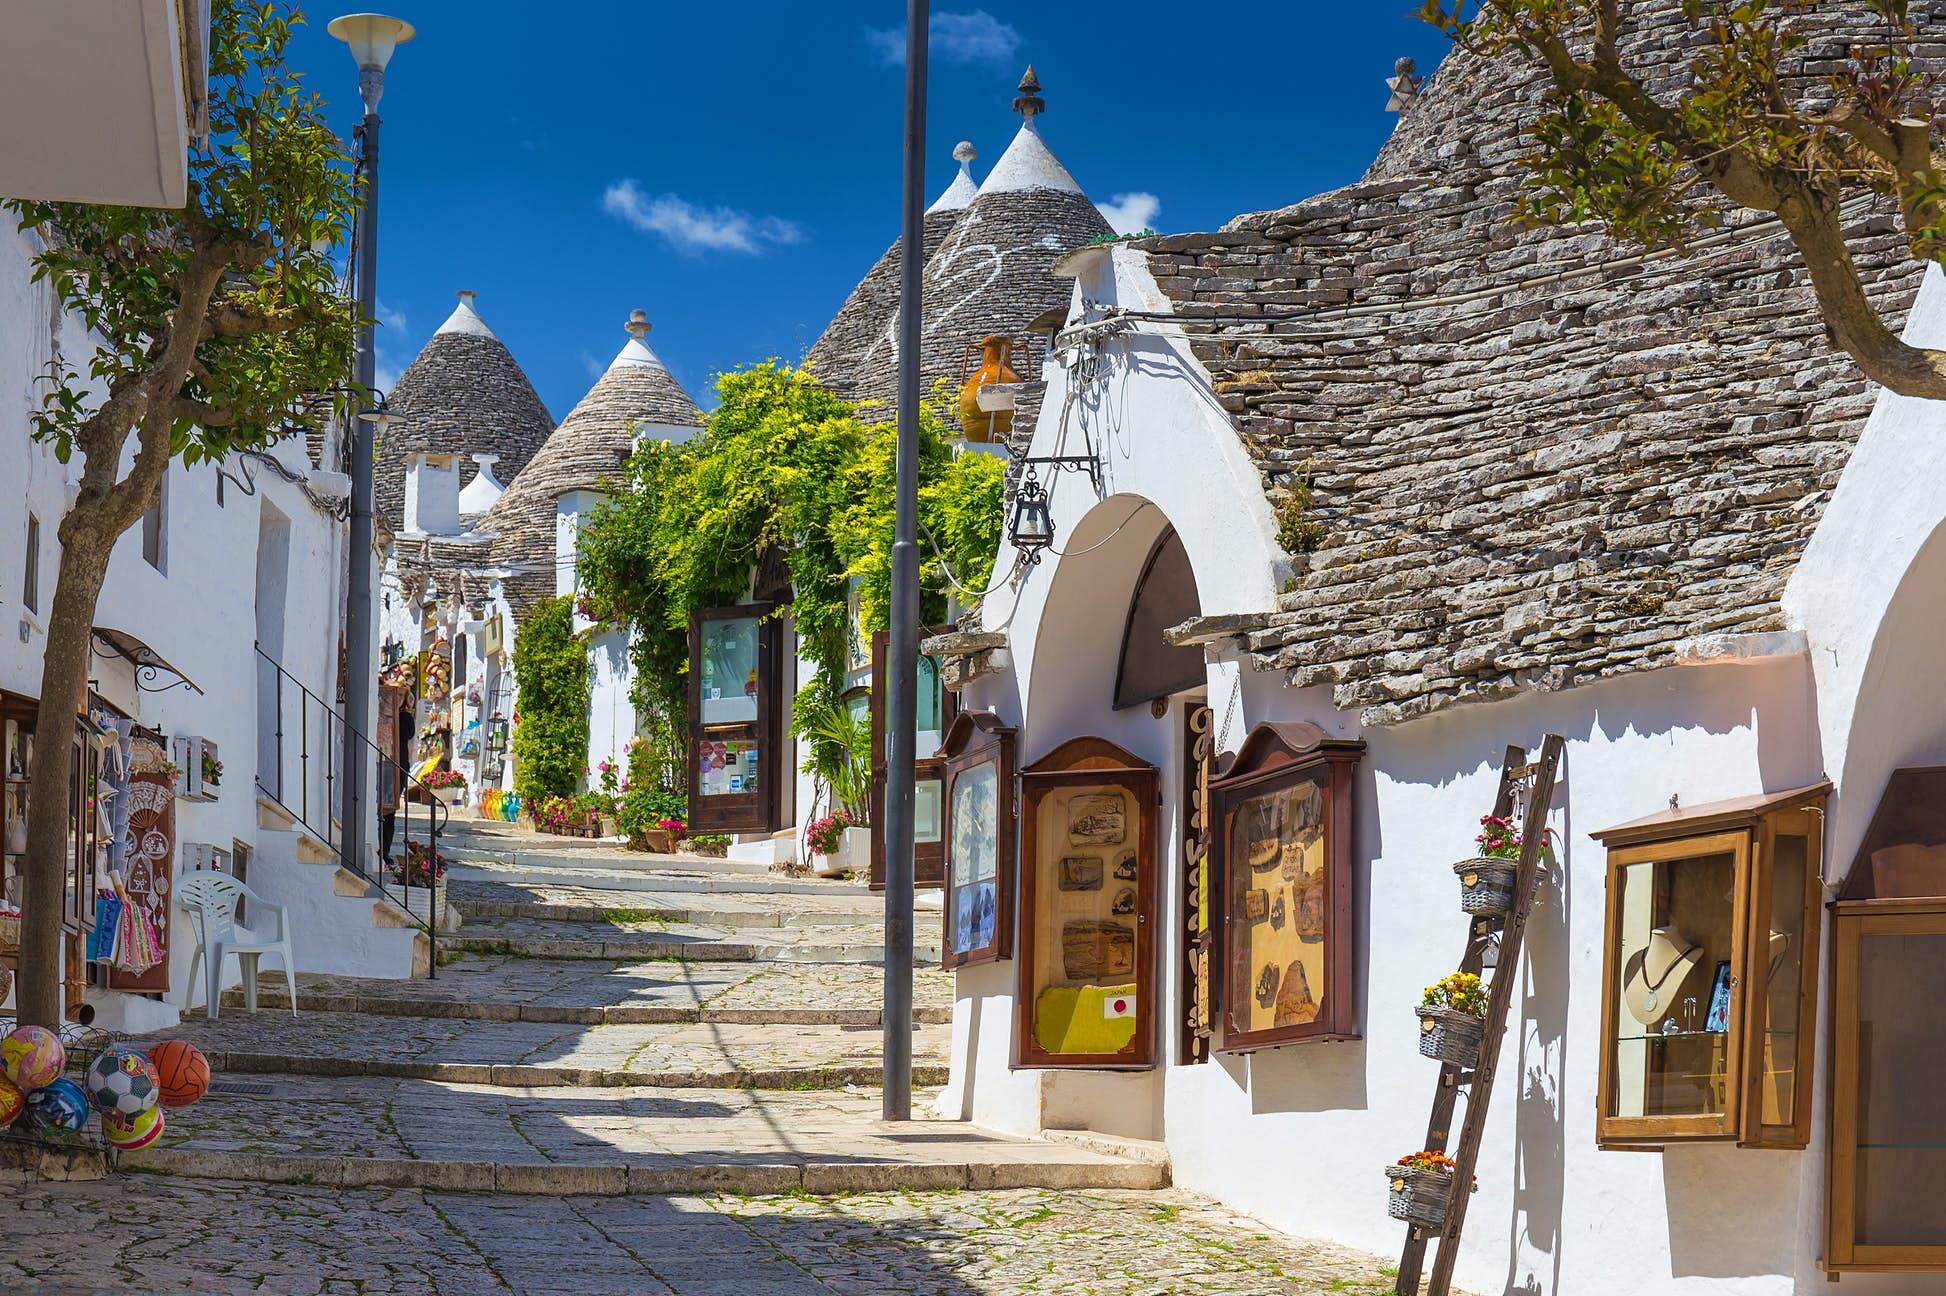 Puglia is home to the pretty town of Alberobello with its famous trulli houses ©Josef Skacel/Shutterstock